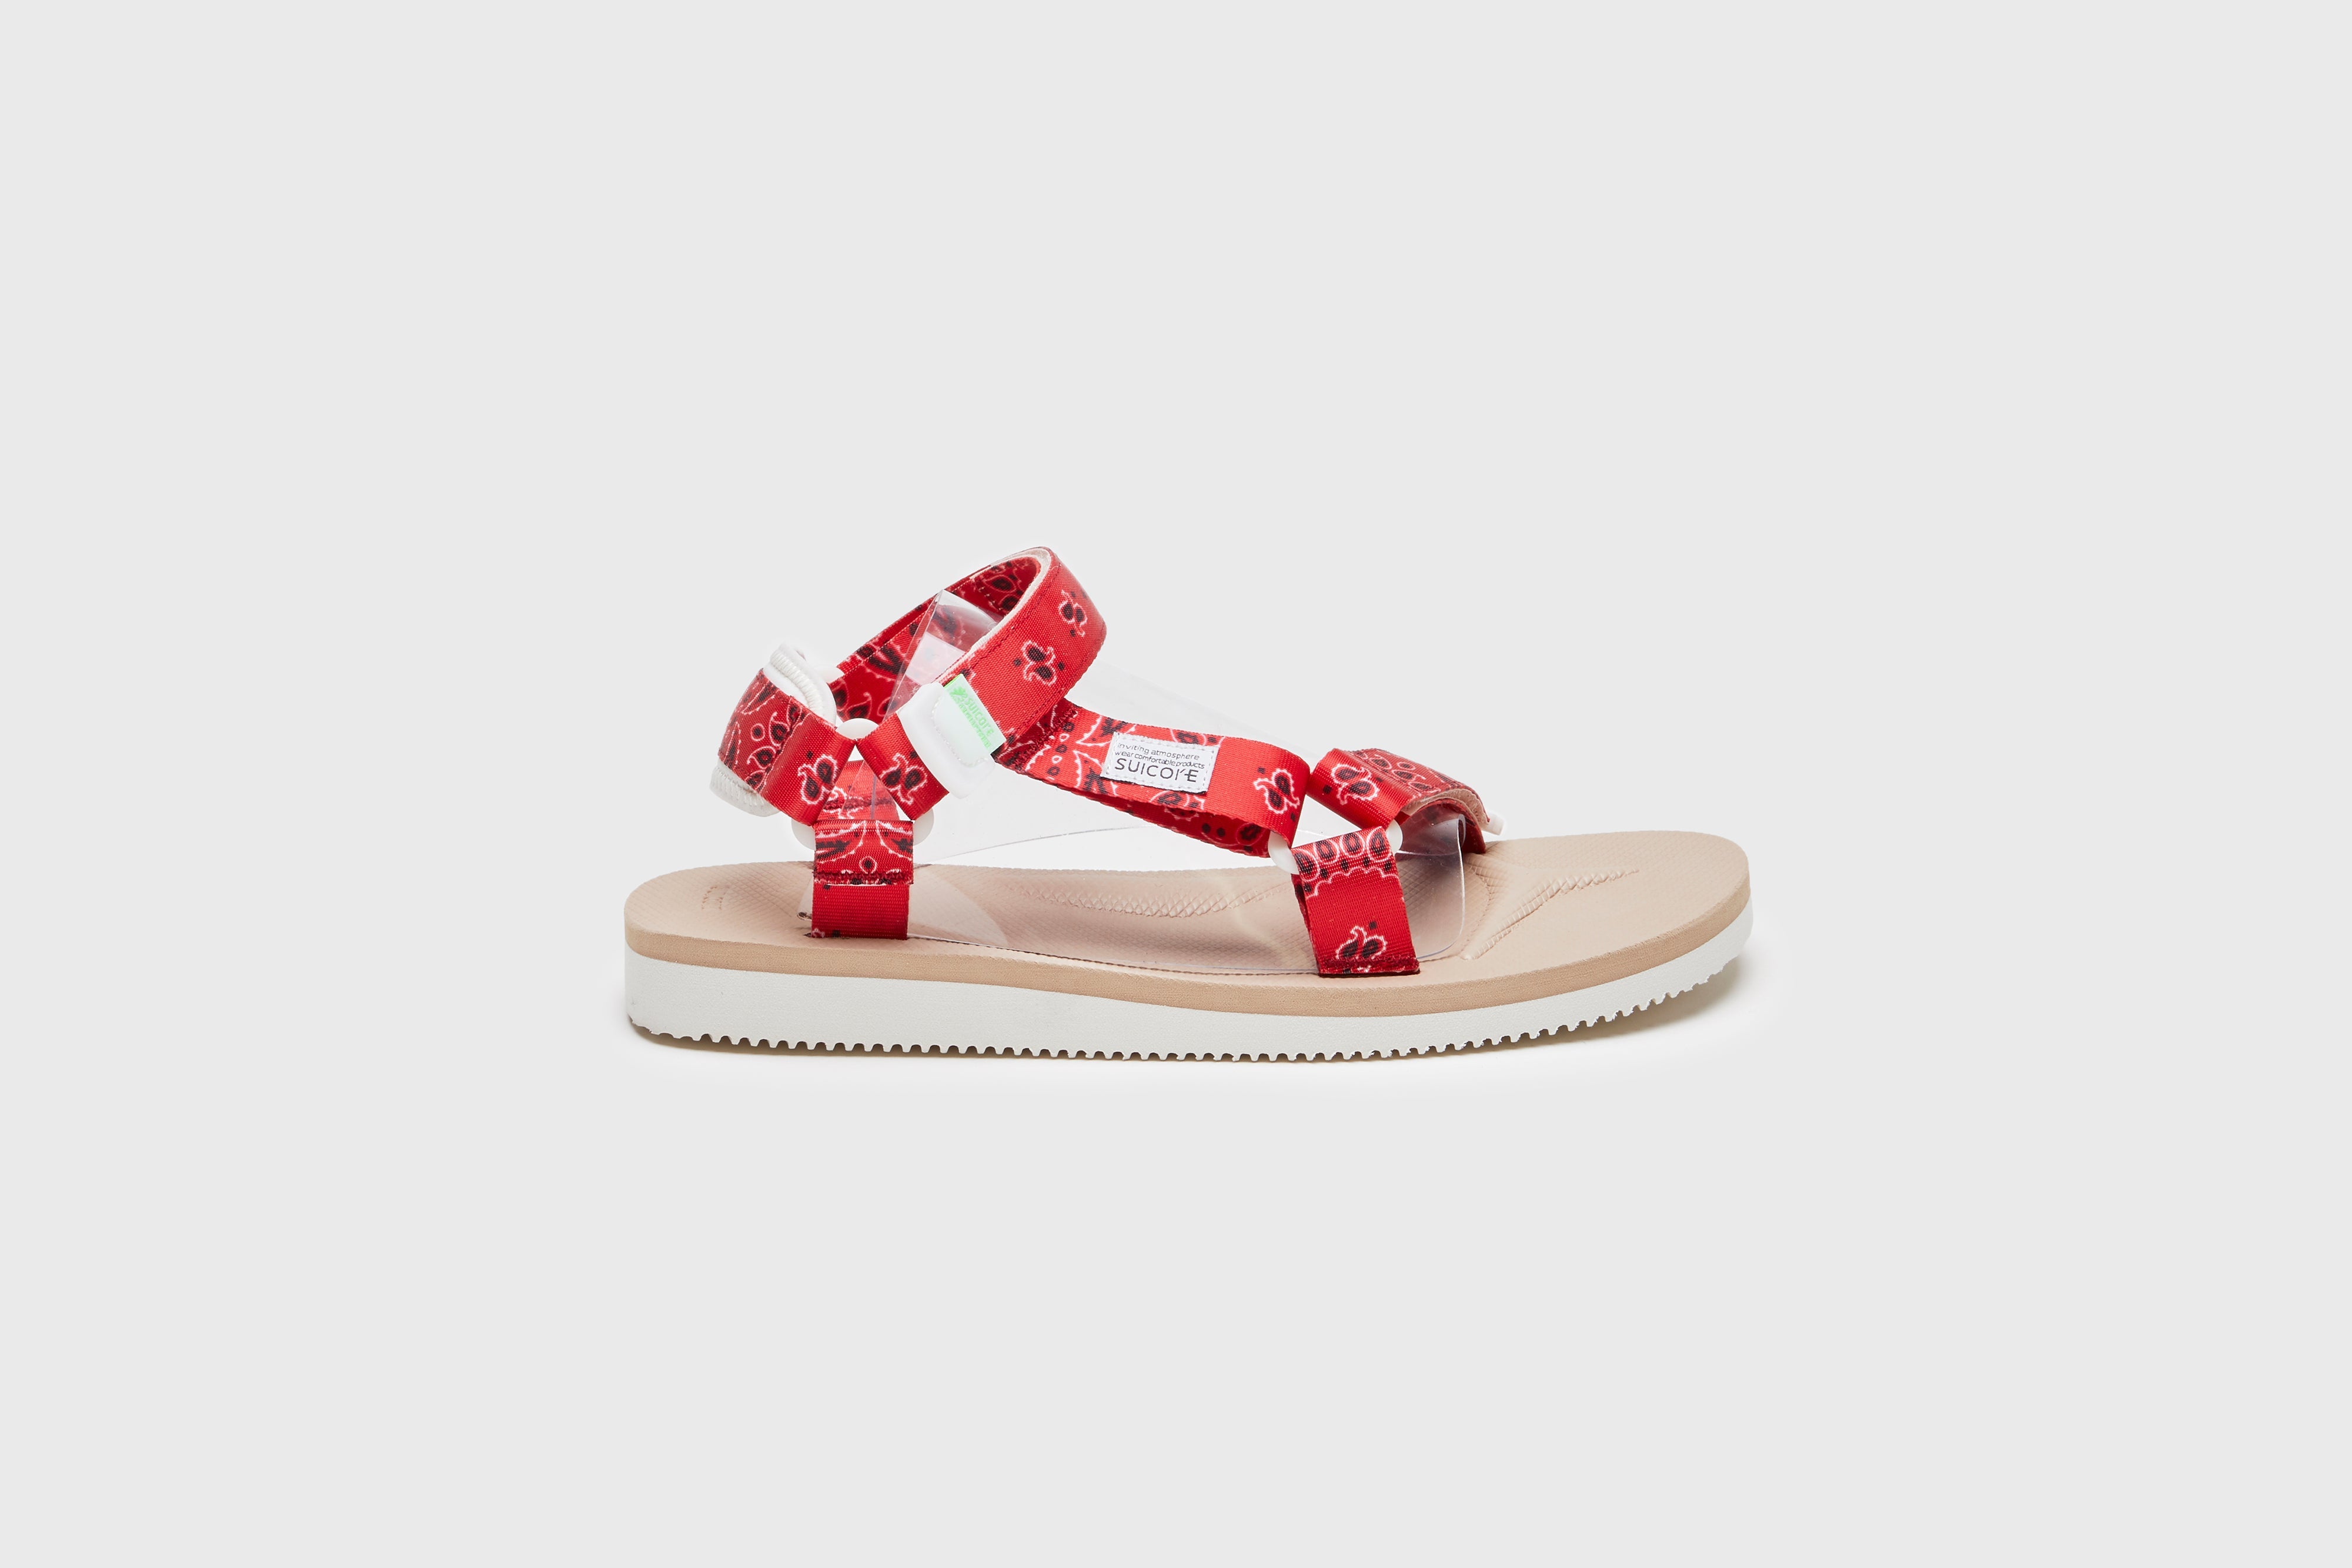 SUICOKE DEPA-Cab-PT05 sandals with red &amp; beige nylon upper, red &amp; beige midsole and sole, strap and logo patch. From Spring/Summer 2023 collection on eightywingold Web Store, an official partner of SUICOKE. OG-022CAB-PT05 RED X BEIGE